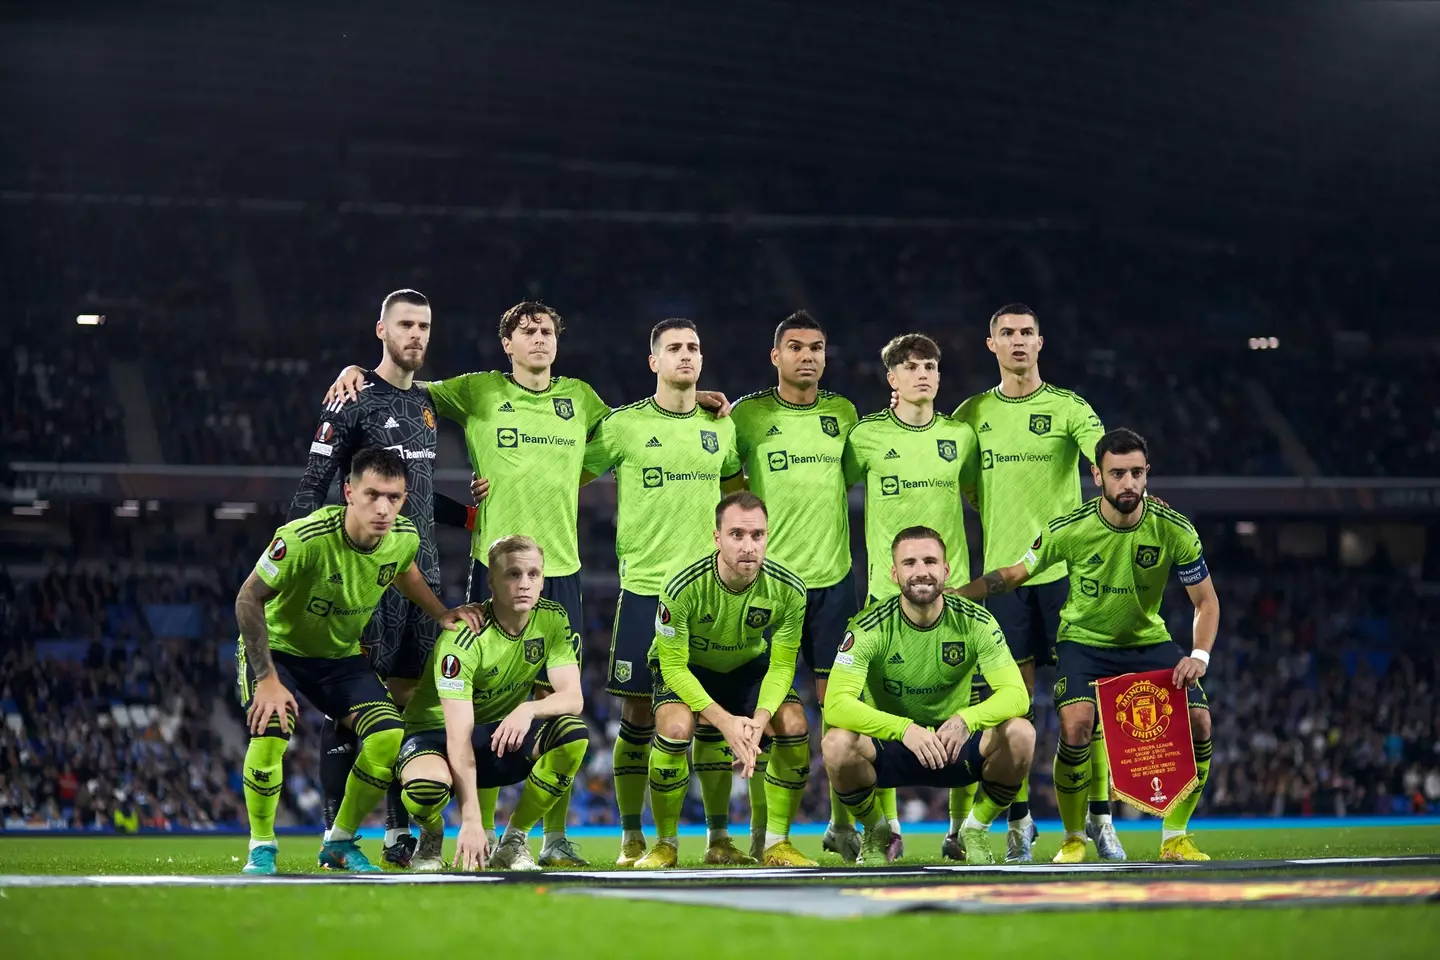 United's team prior to kick-off against Real Sociedad earlier this month. (Image